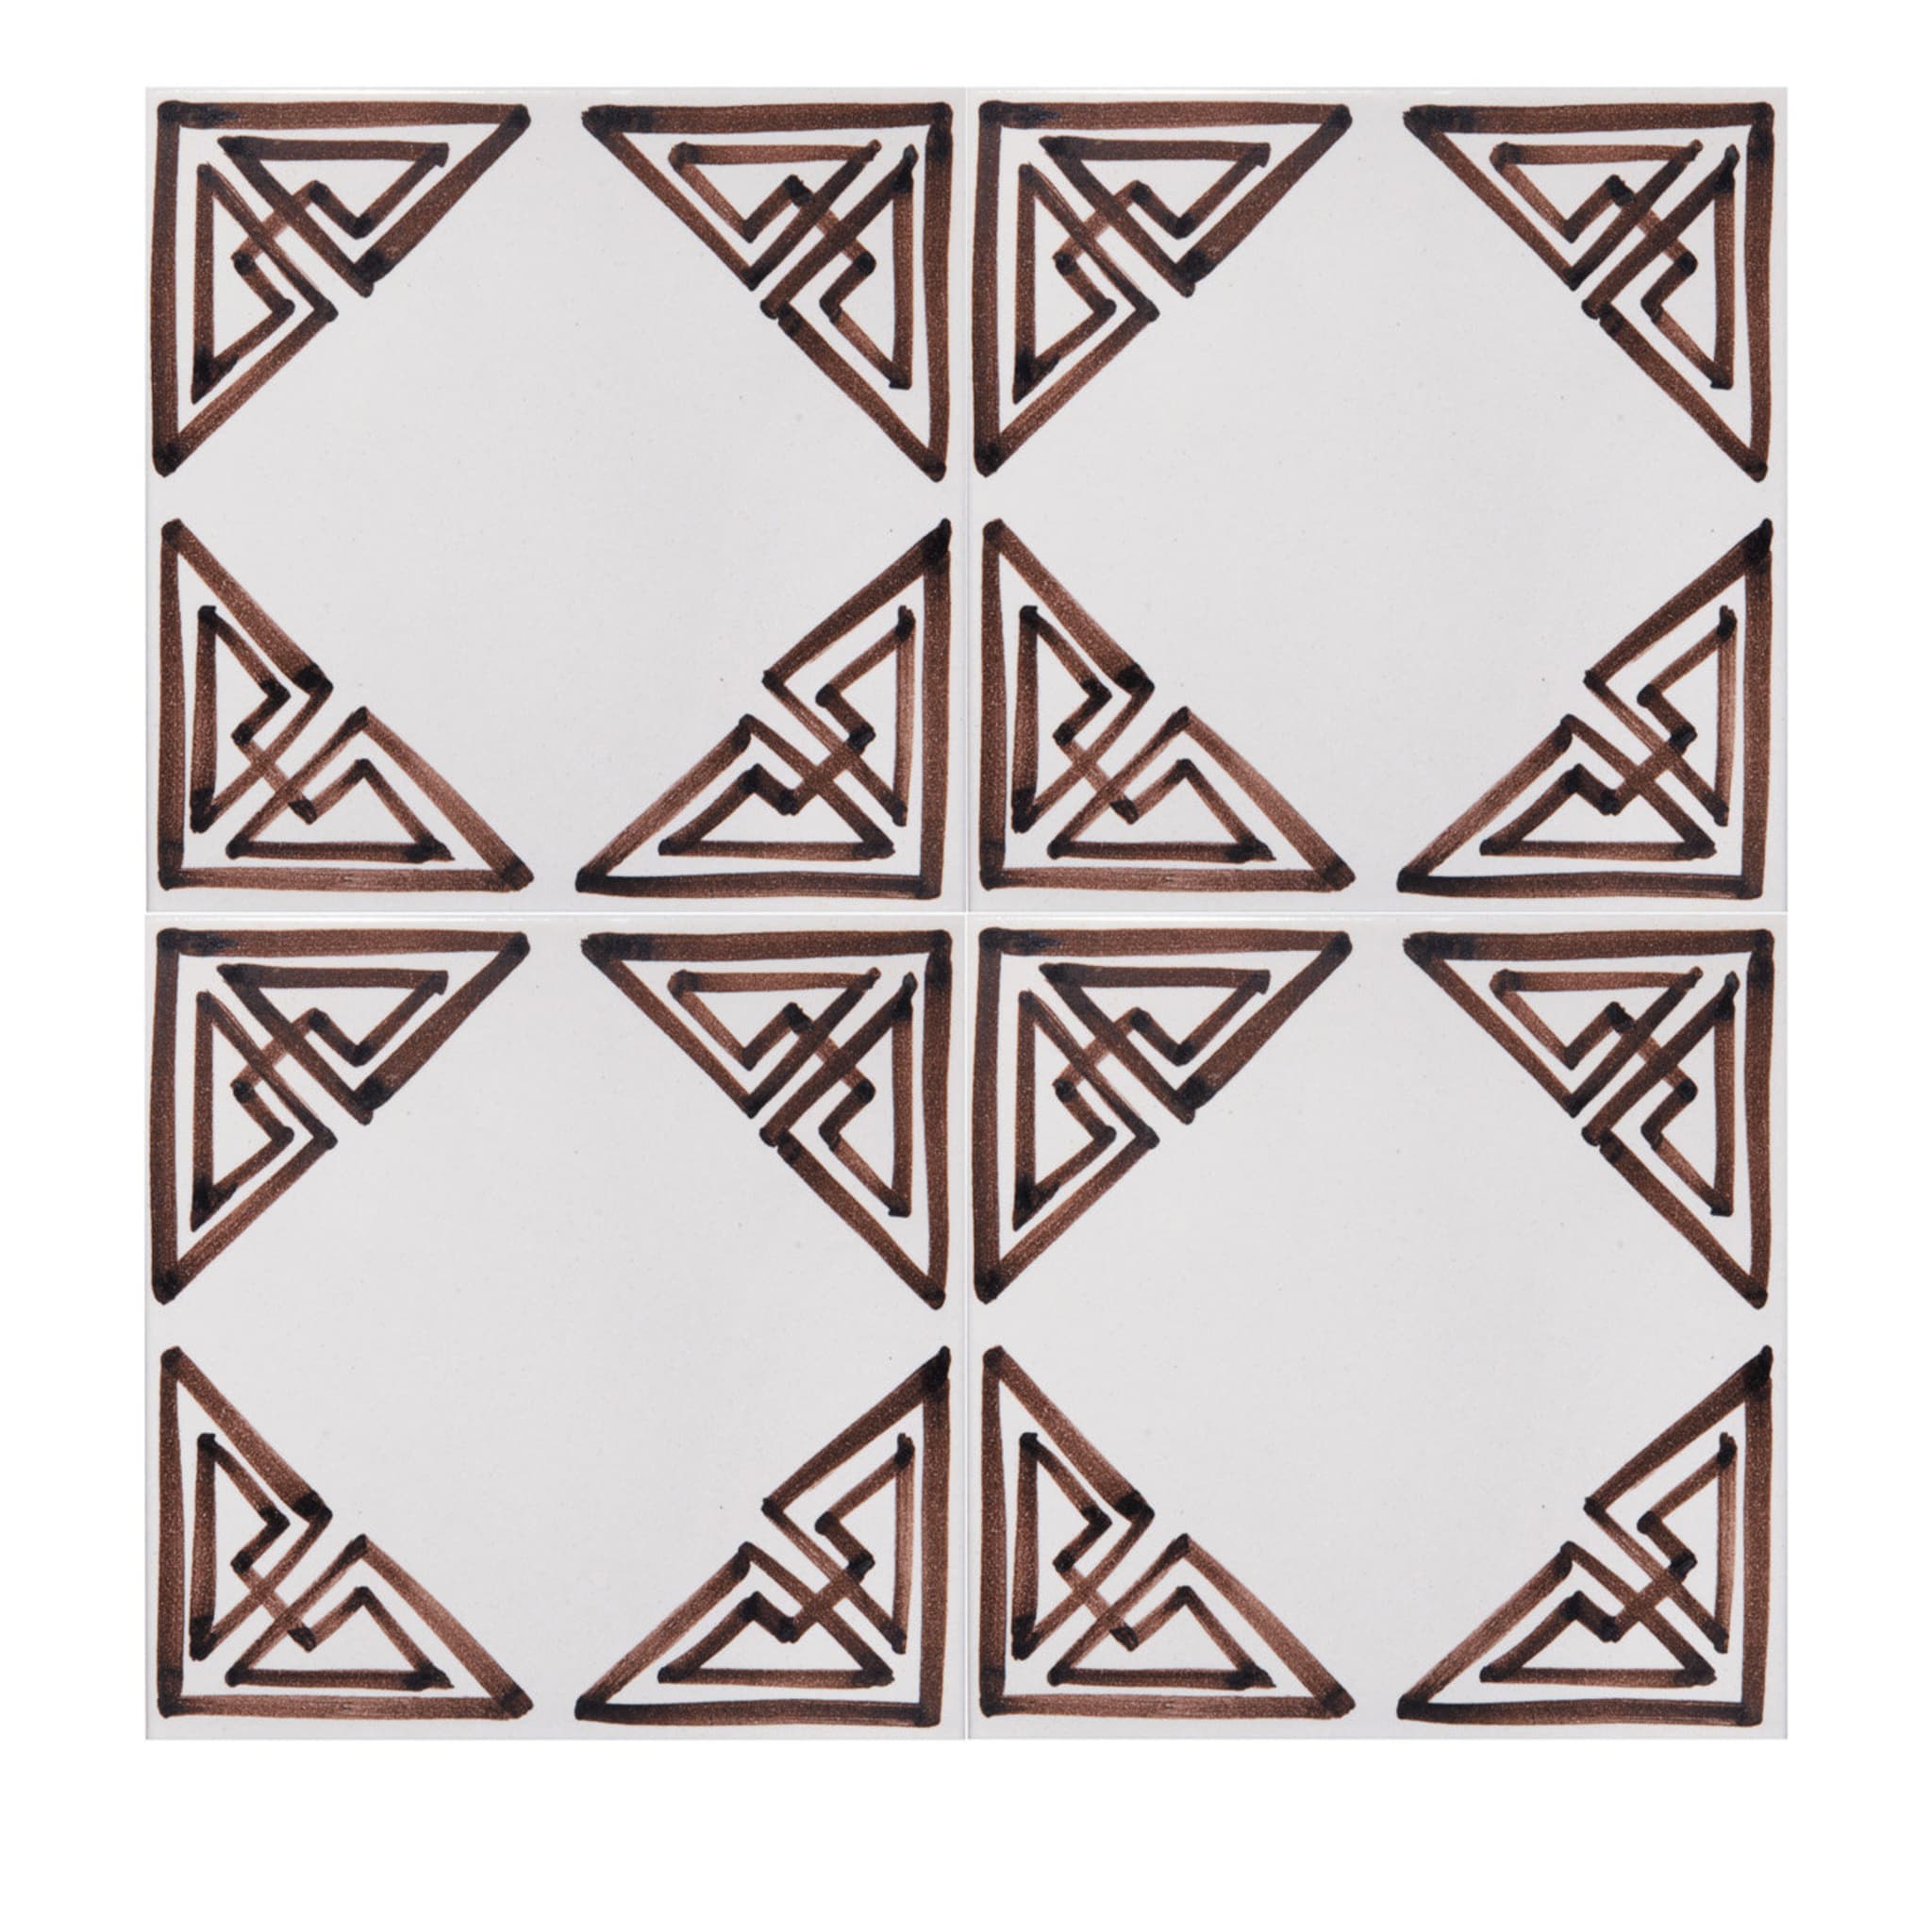 Set of 4 Room Tiles - Main view